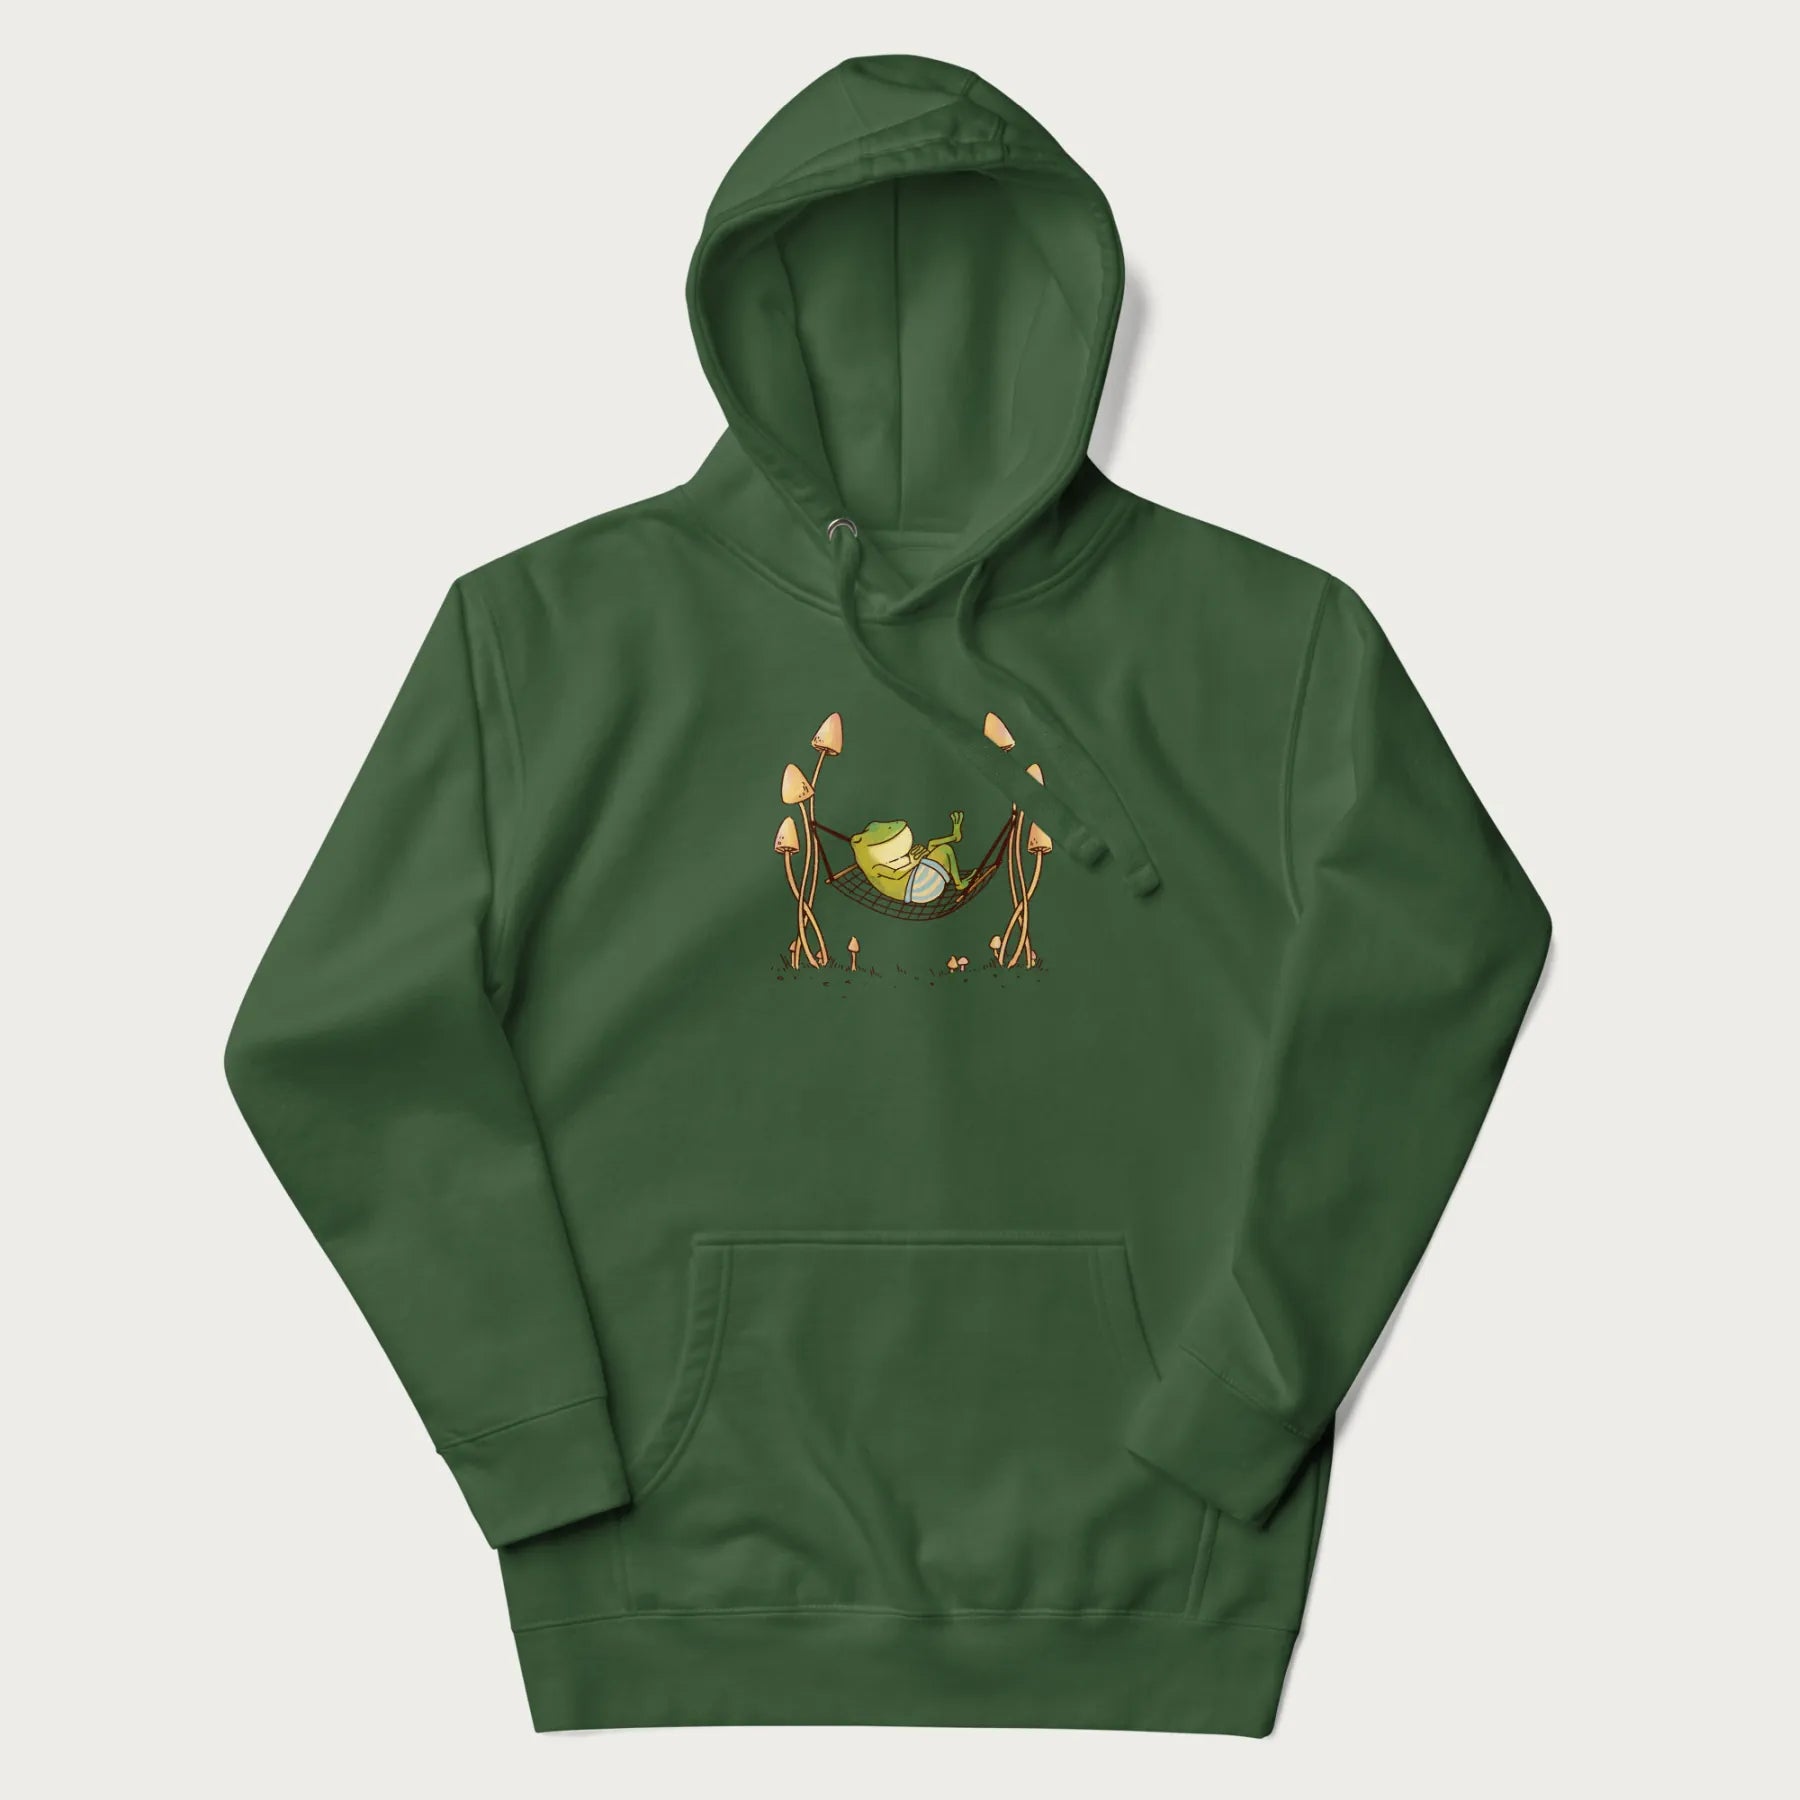 Forest green hoodie with a graphic of a frog lounging in a hammock between tall mushrooms.